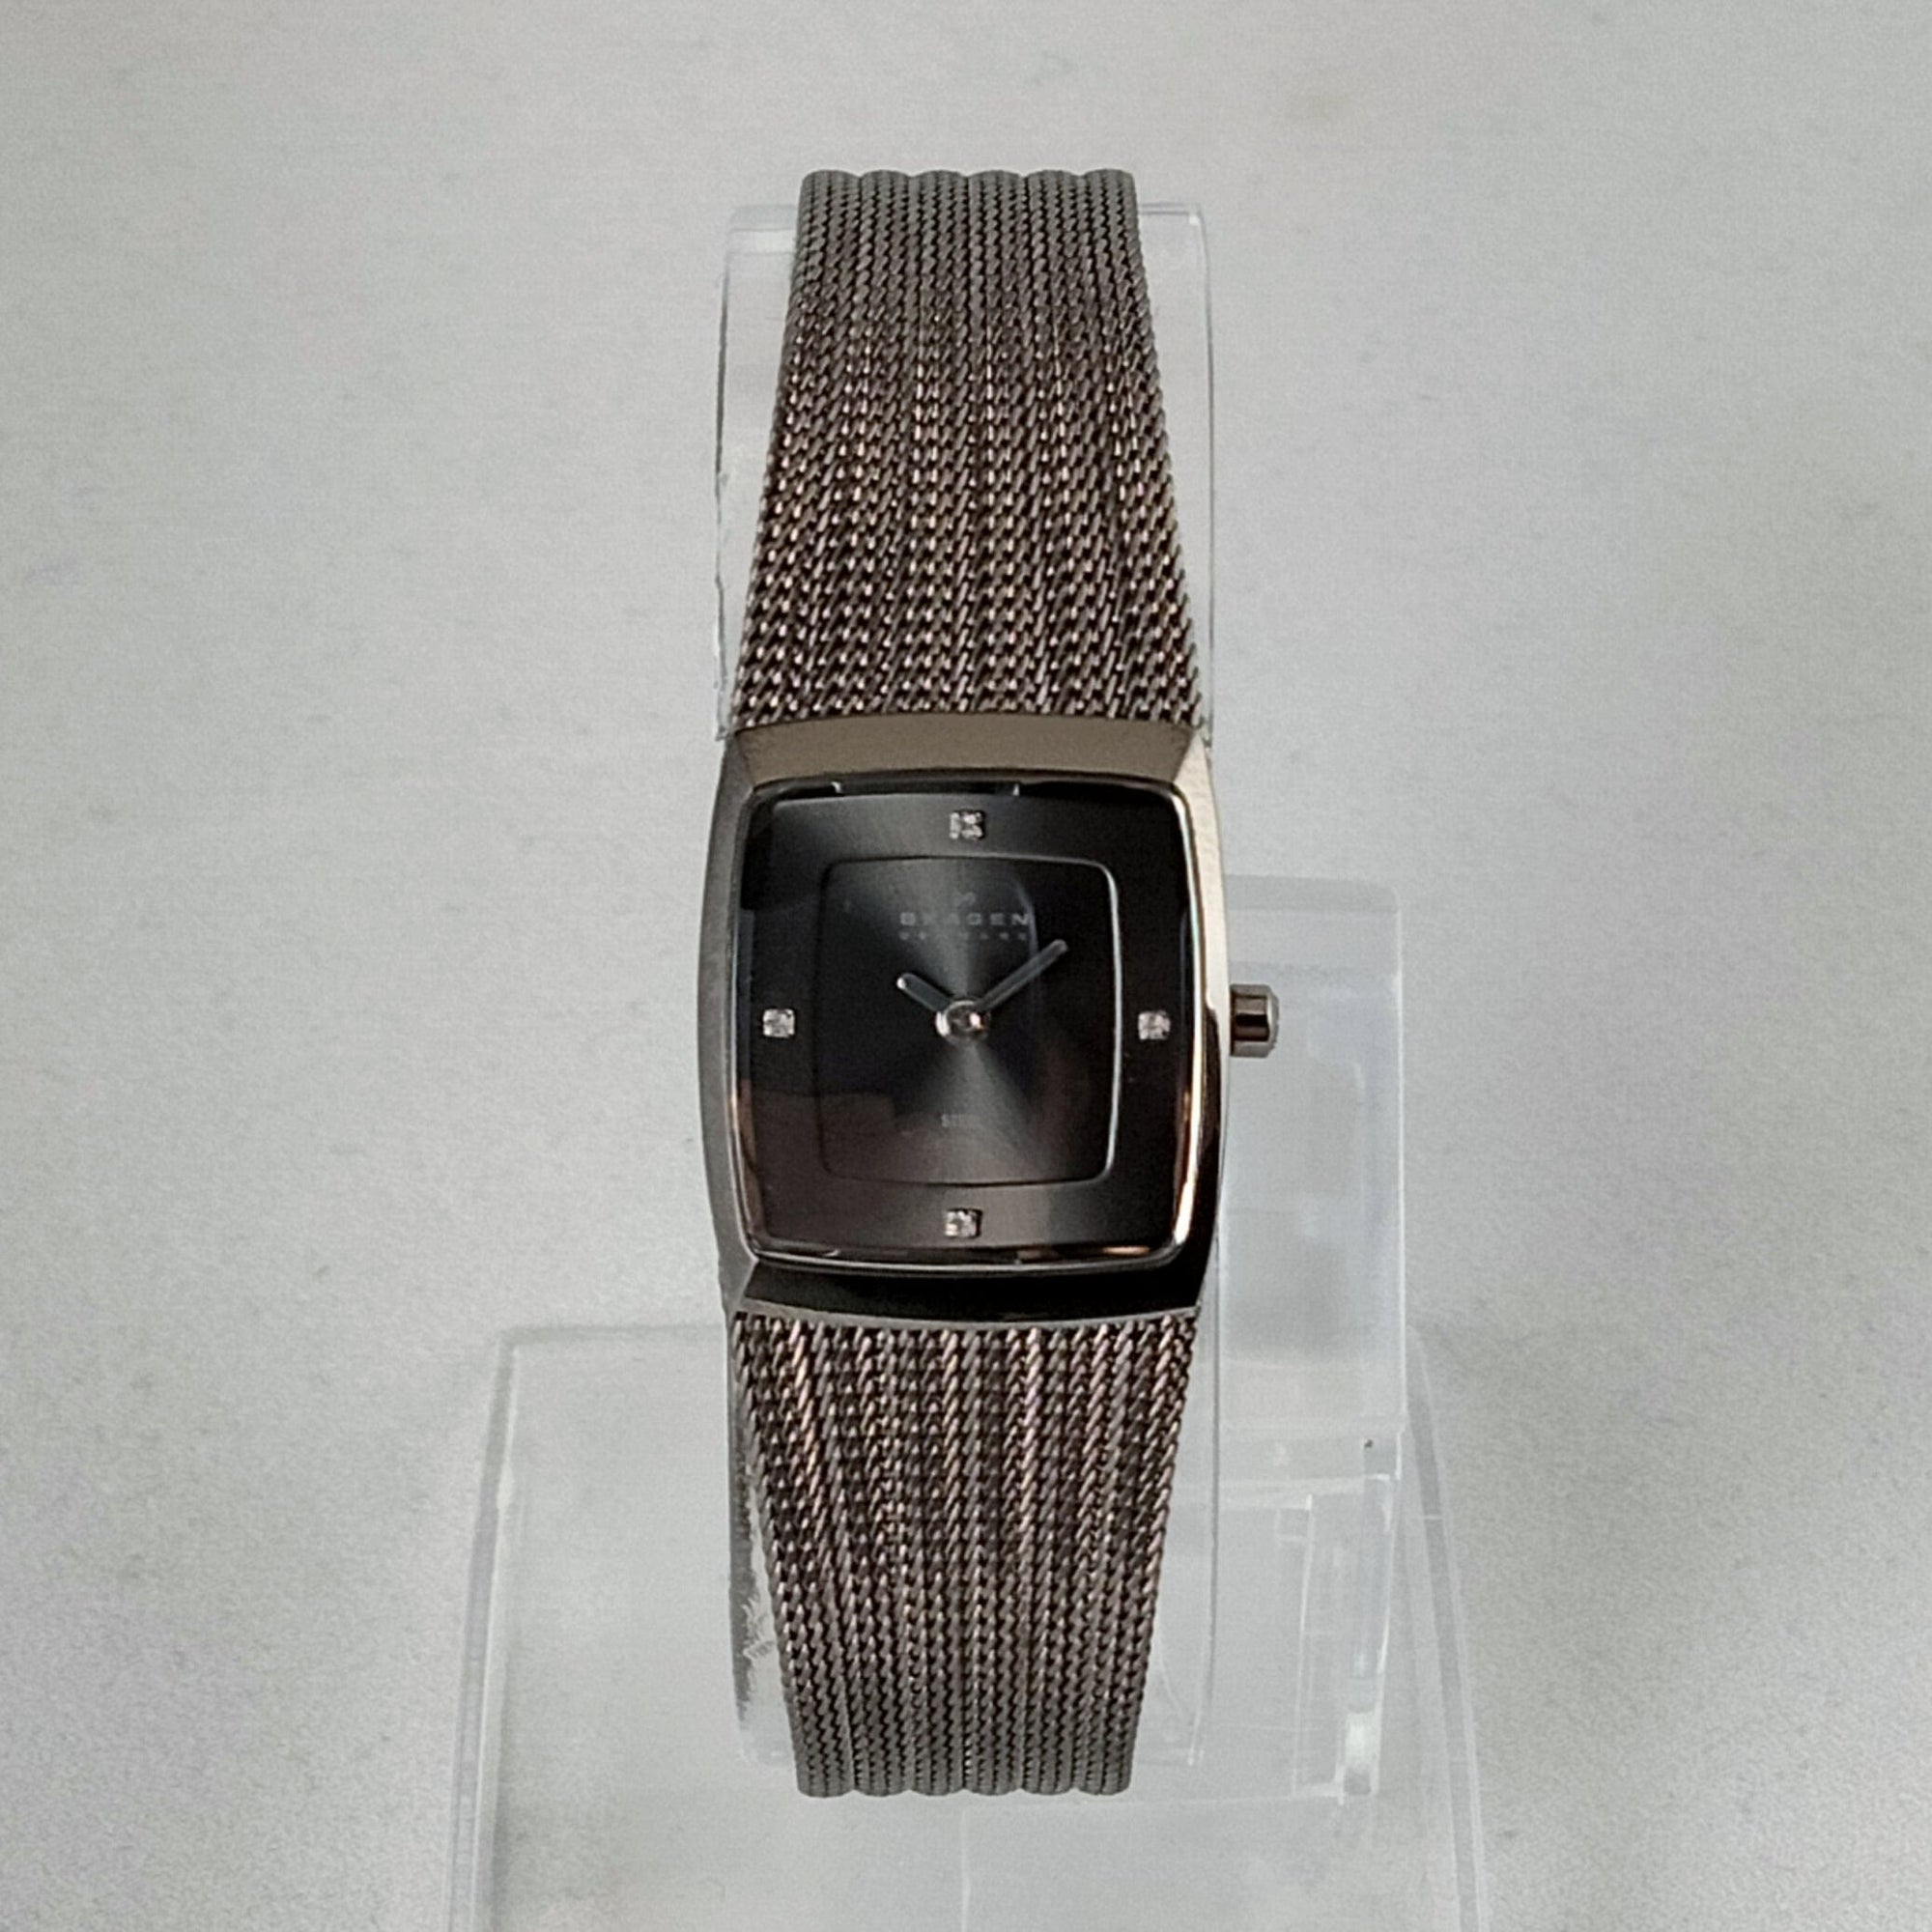 I Like Mikes Mid Century Modern Watches Skagen Women's Stainless Steel Square Watch, Black Dial, Mesh Strap